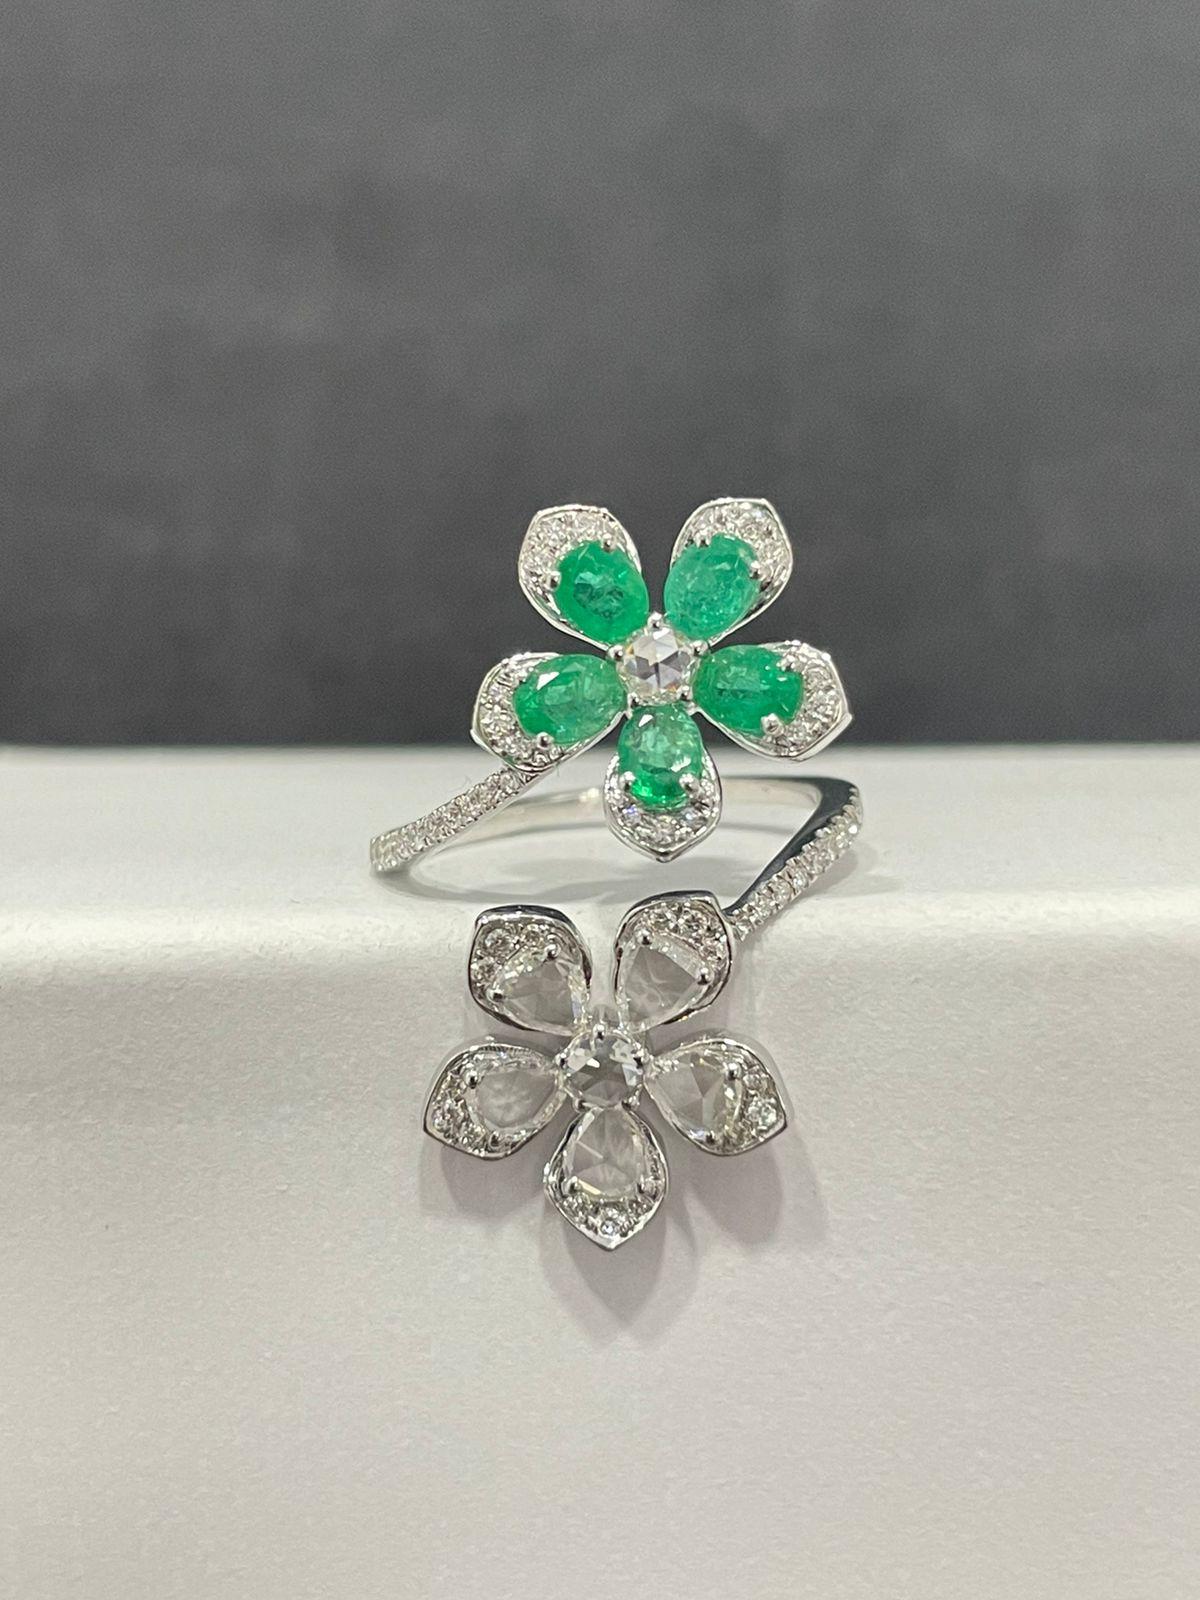 PANIM Floral Diamond Rosecut & Emrald Ring in 18 Karat White Gold

Inspired by Nature,
Set in 18K White Gold with Diamond Rosecuts Pears & Emerald

Colour FGH
Quality VS

Contact us on this platform to get more details